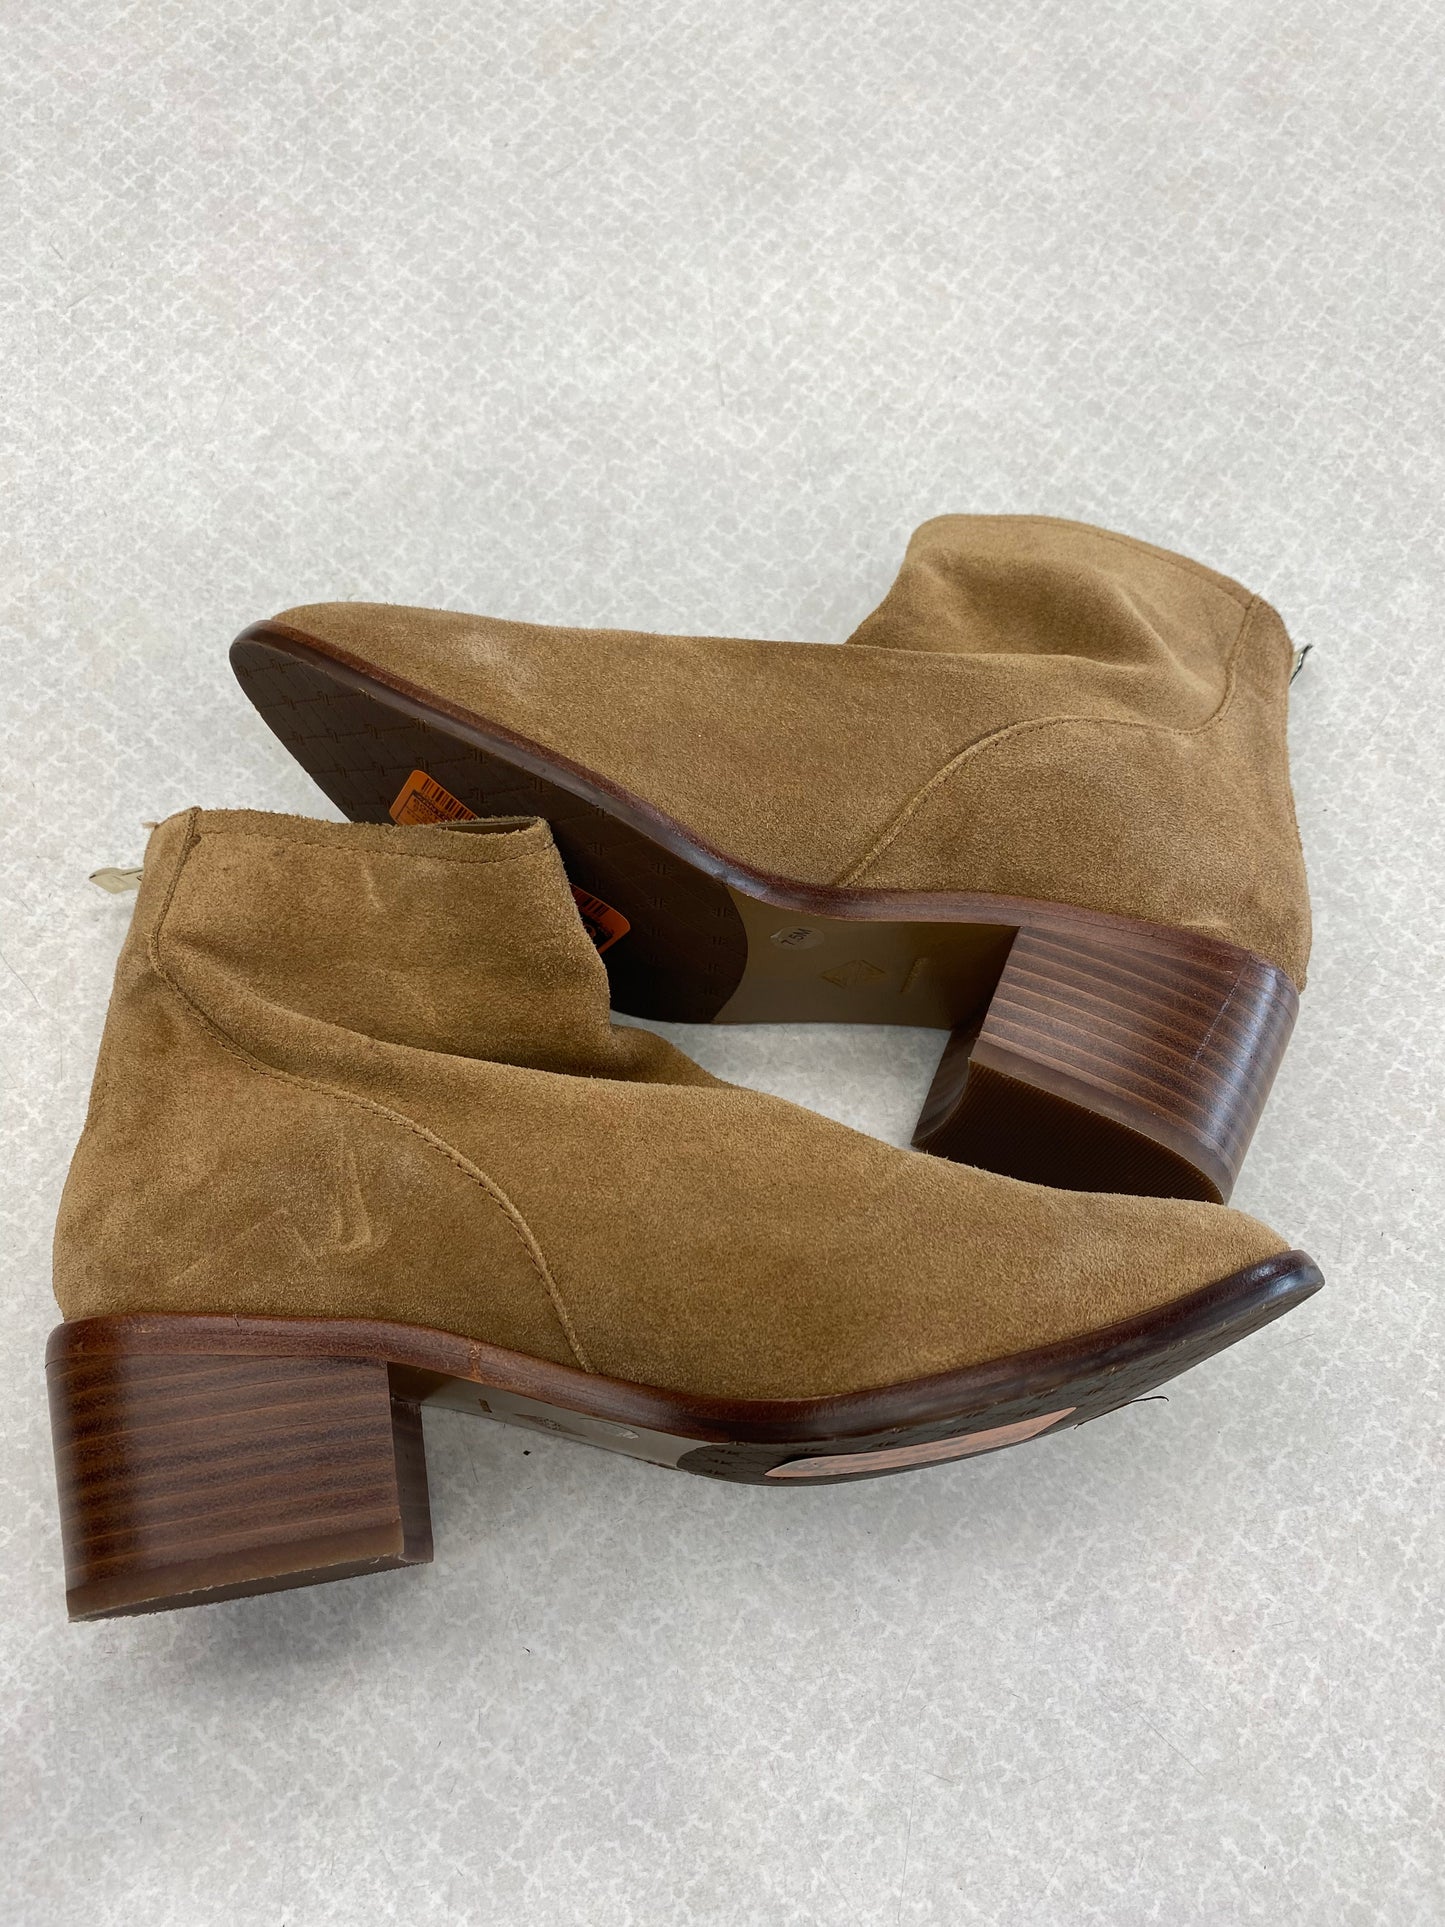 Boots Ankle Heels By Antonio Melani  Size: 7.5